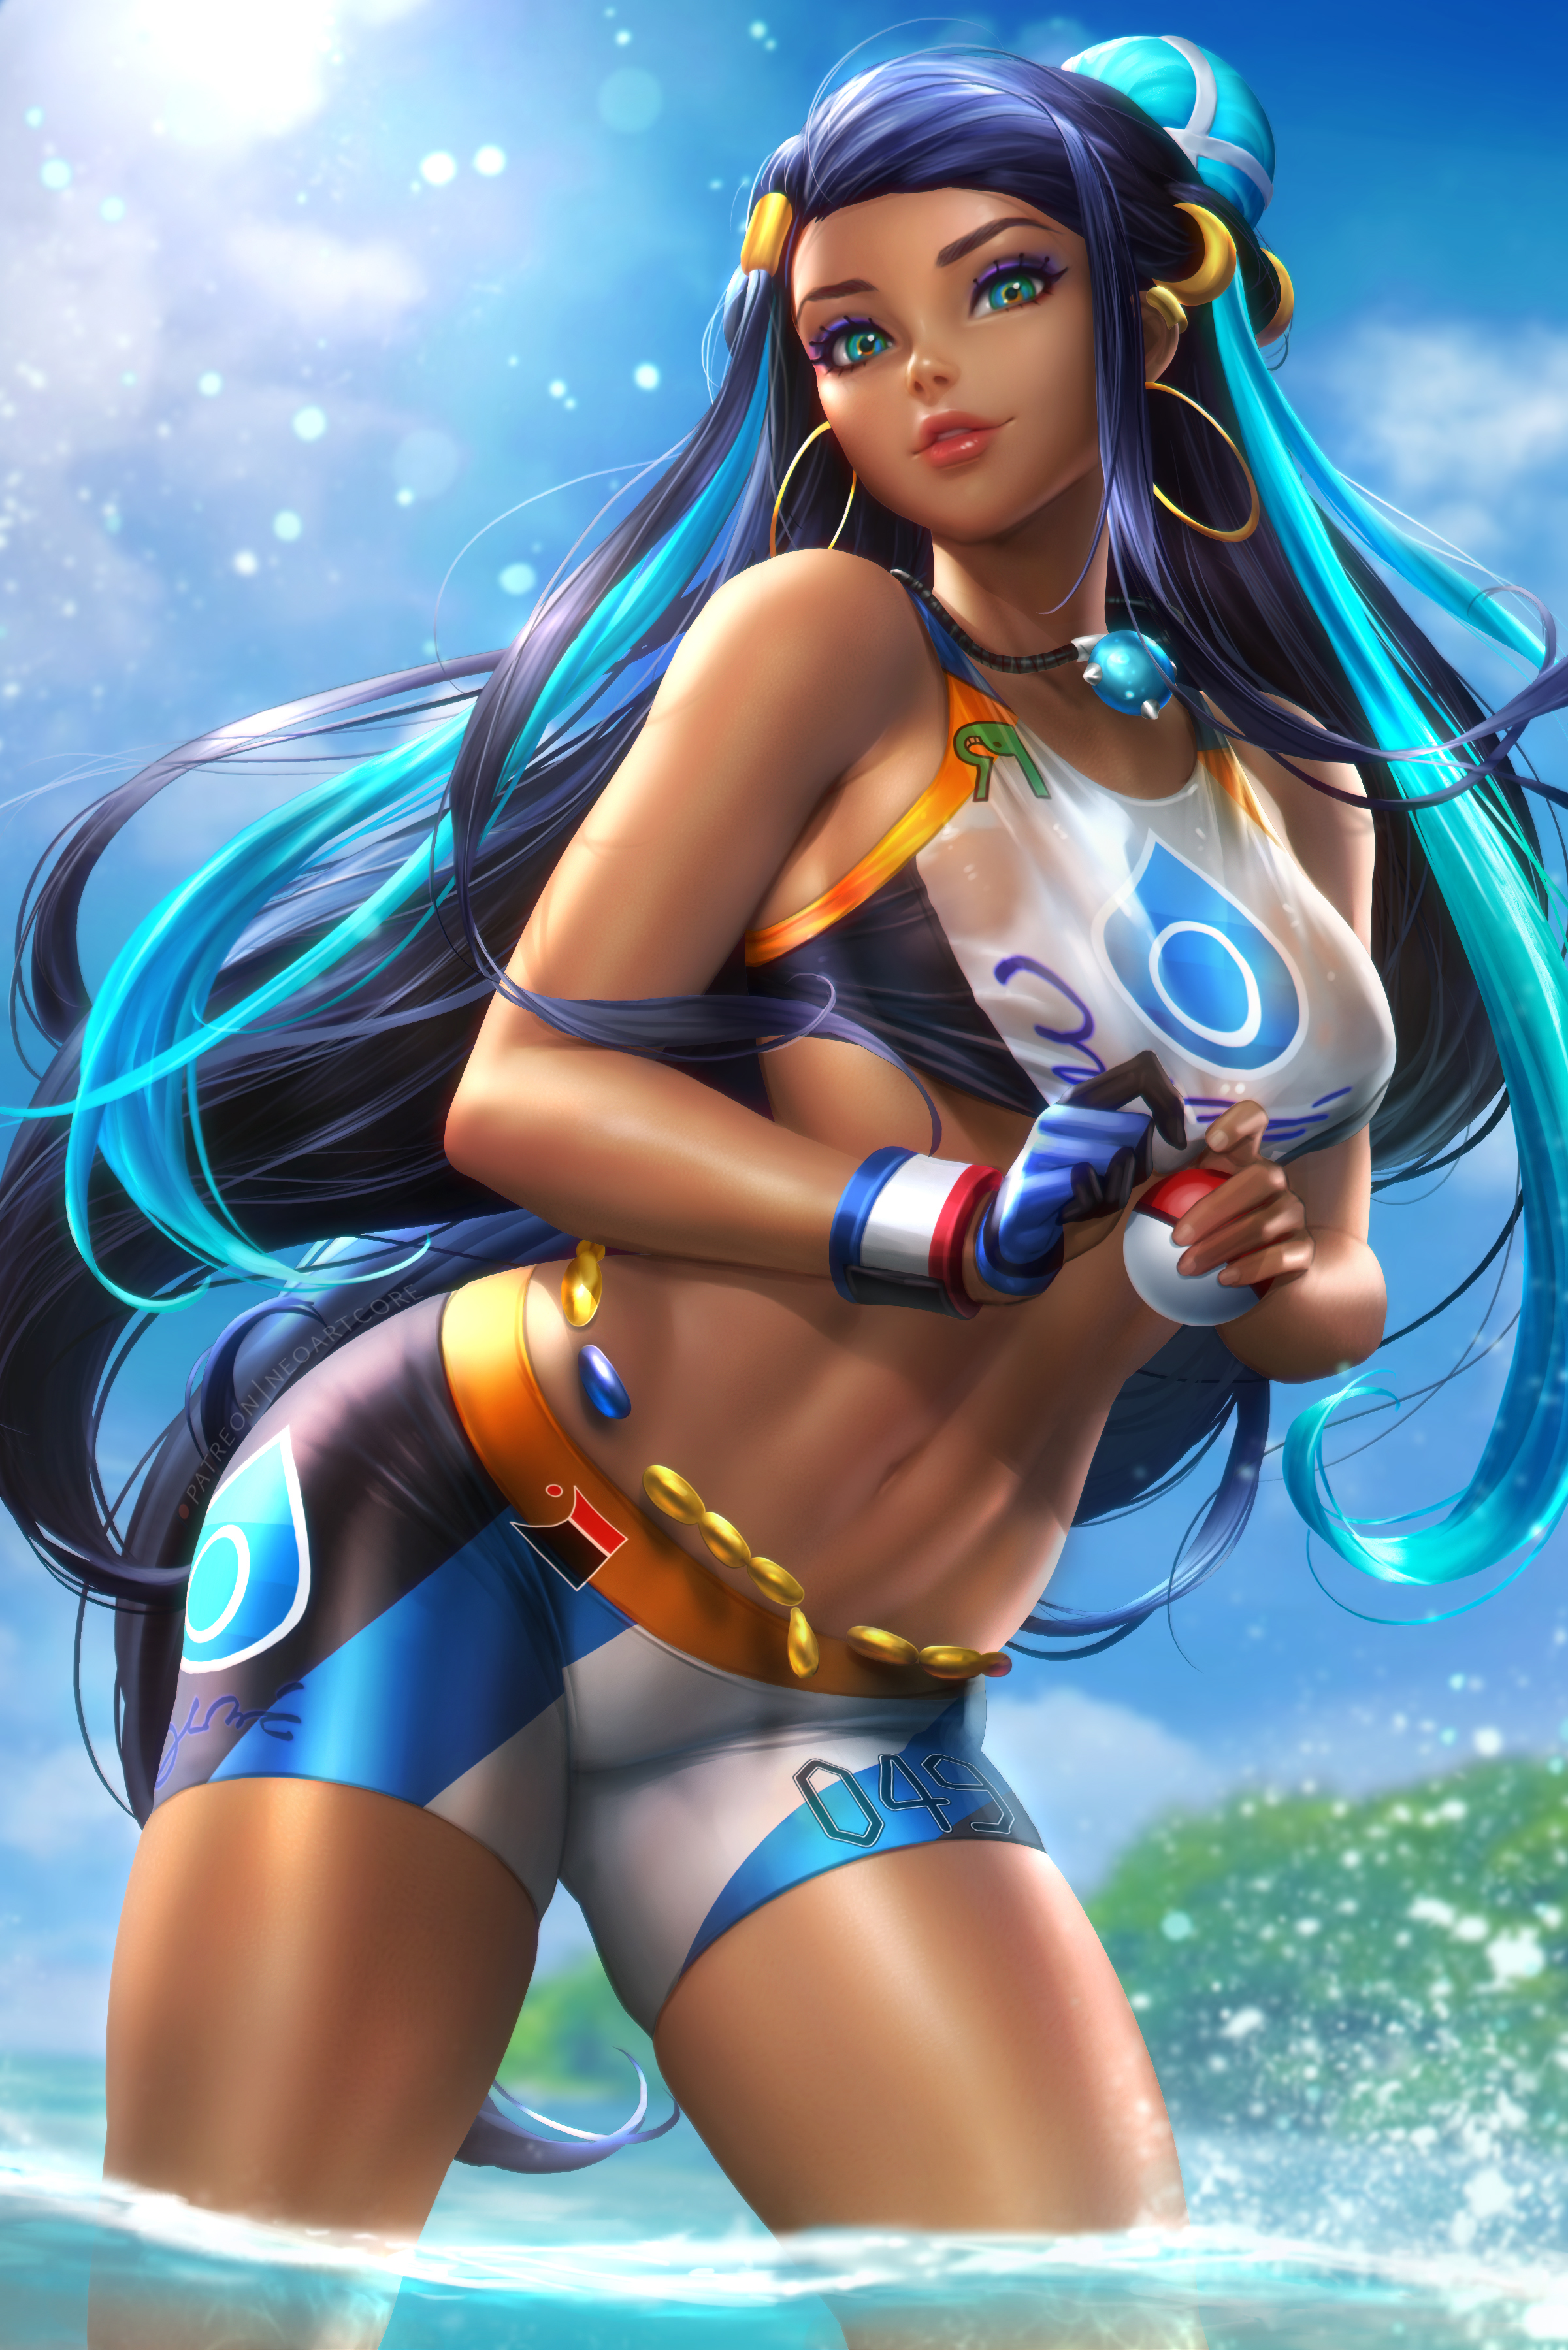 Anime 2400x3597 Nessa (Pokémon Sword and Shield) Pokémon Pokemon Sword & Shield video games anime anime girls long hair looking at viewer smiling necklace swimwear wet clothing belly short shorts in water summer sky fingerless gloves Poke Ball portrait display video game characters video game girls artwork drawing digital art fan art NeoArtCorE (artist)